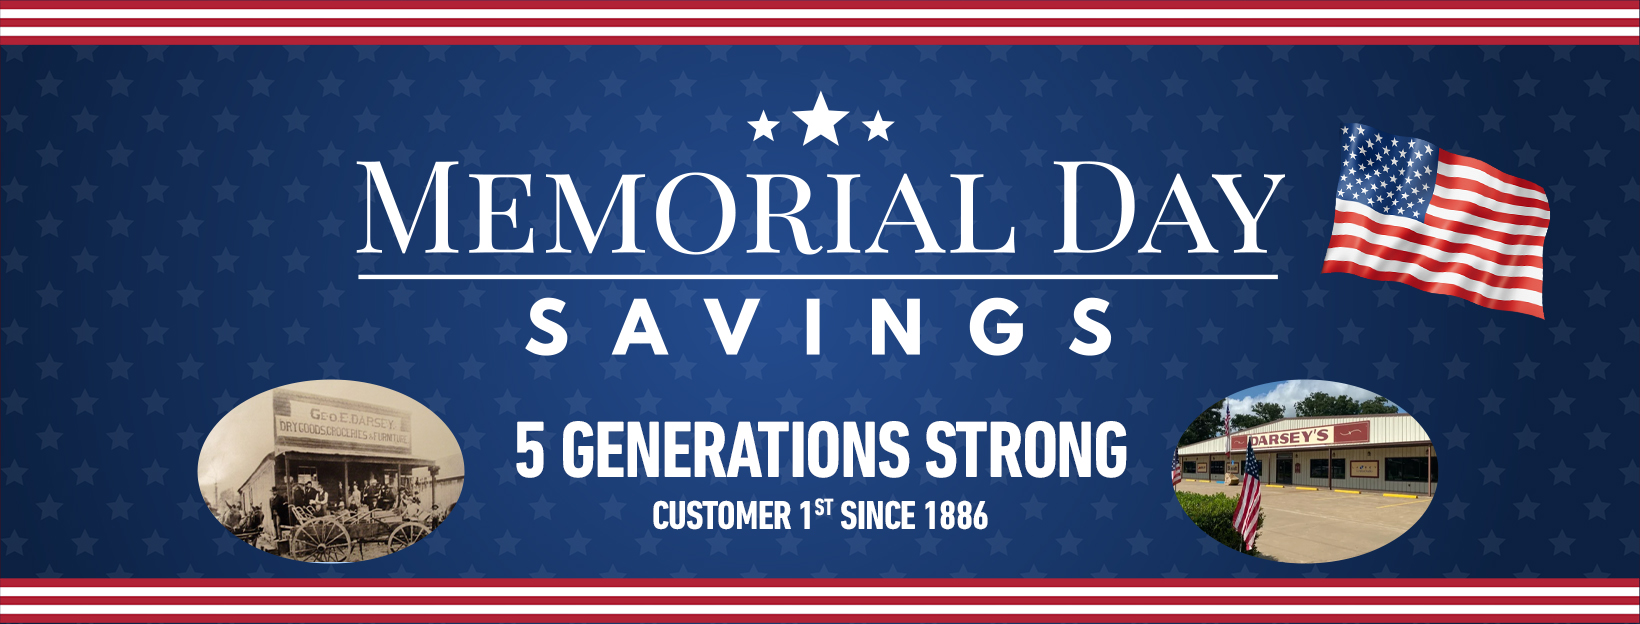 memorial day sales event